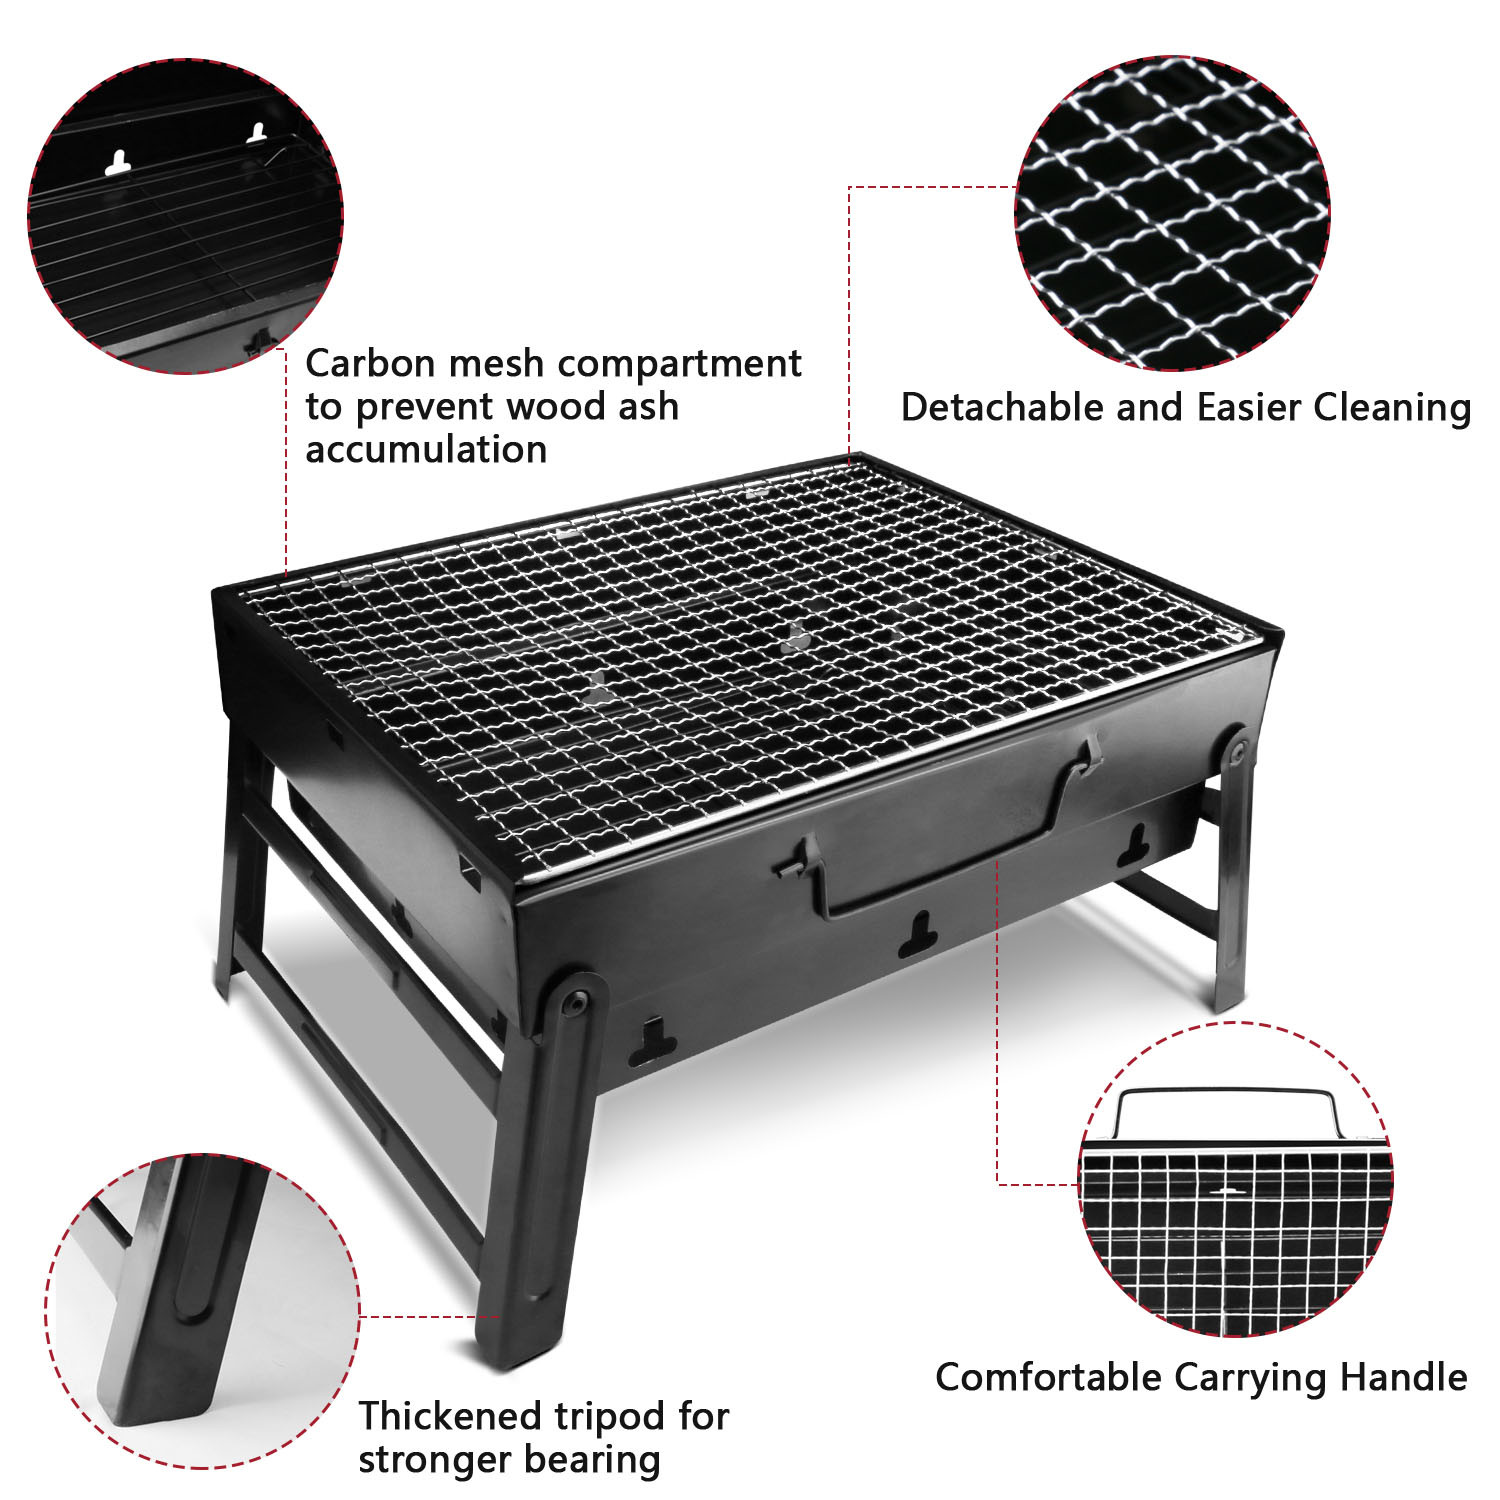 Htwon 13.7" Foldable BBQ Charcoal Grill, Portable Heavy Duty Barbecue Stainless Steel Tabletop Grill Stove with Handle Outdoor Camping Picnic Barbecue BBQ Accessories Tools - image 3 of 14